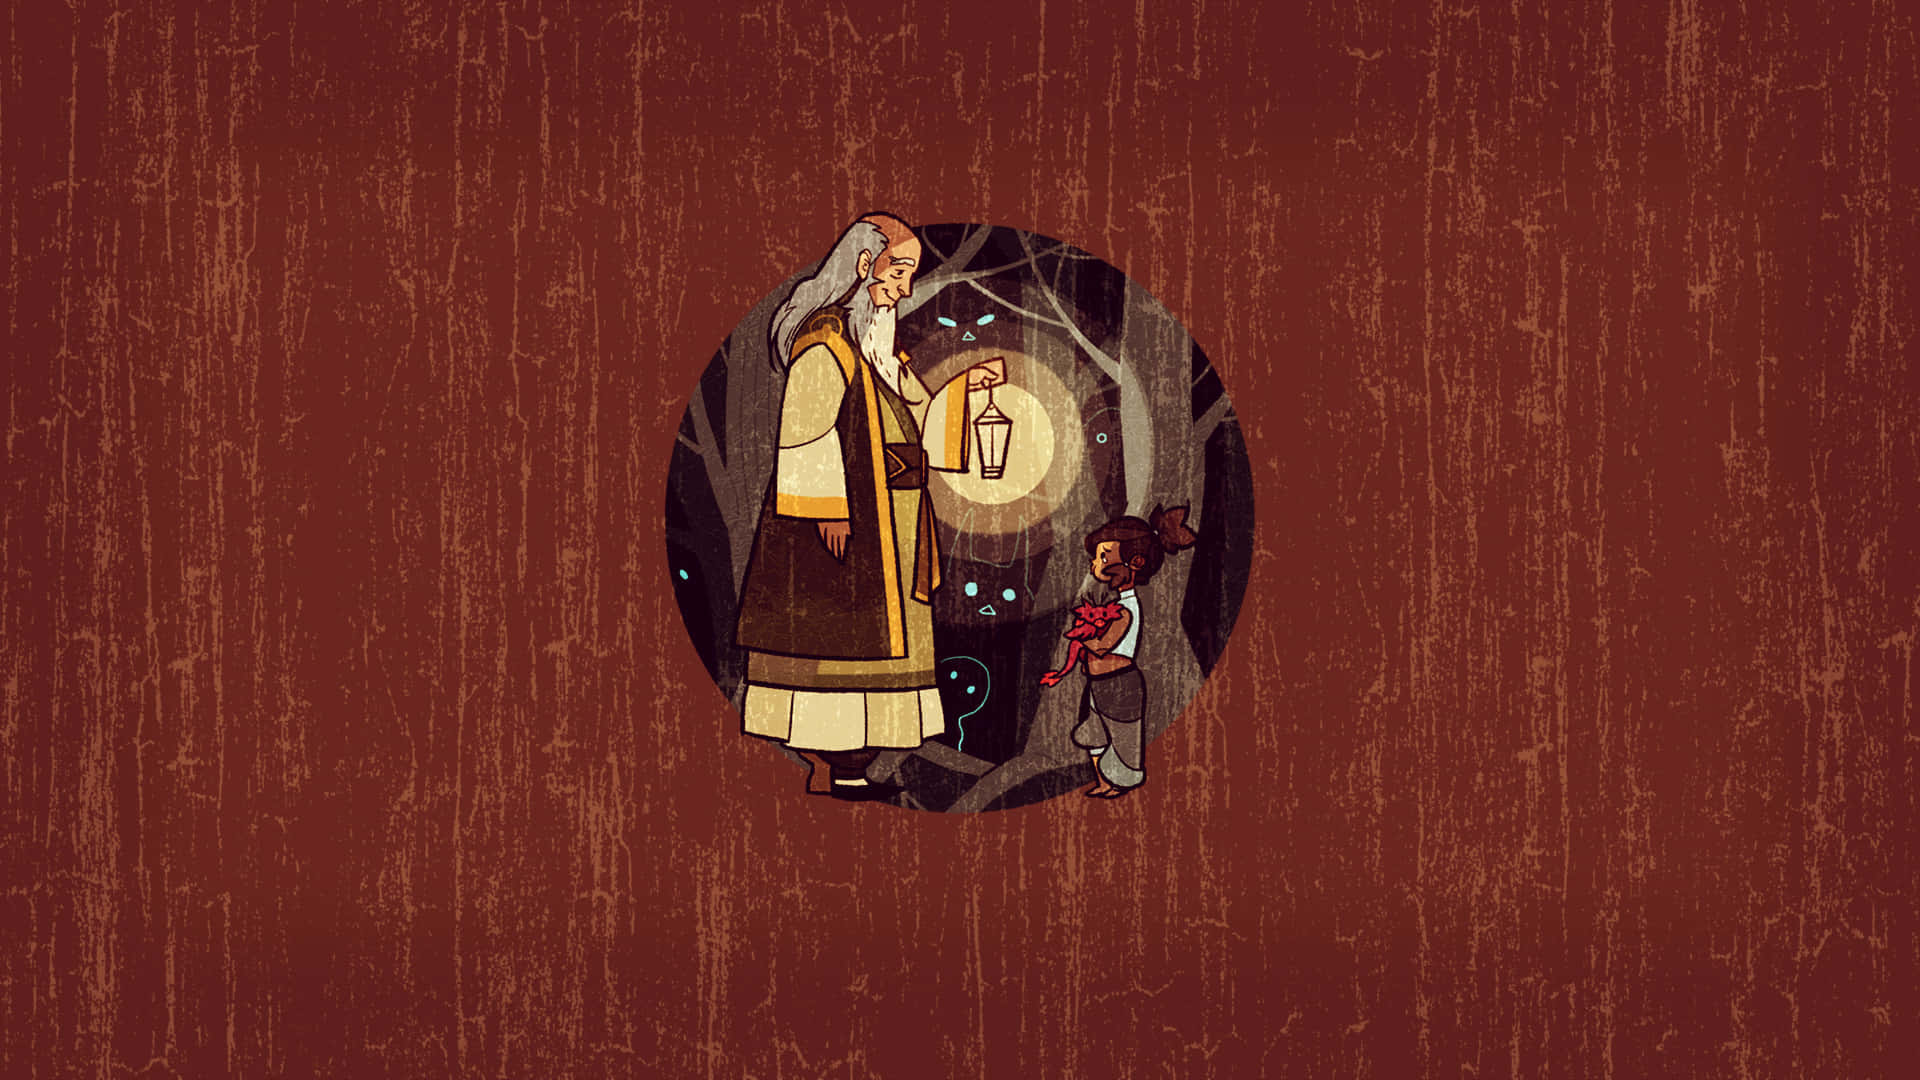 “Uncle Iroh – the wise and patient leader.” Wallpaper